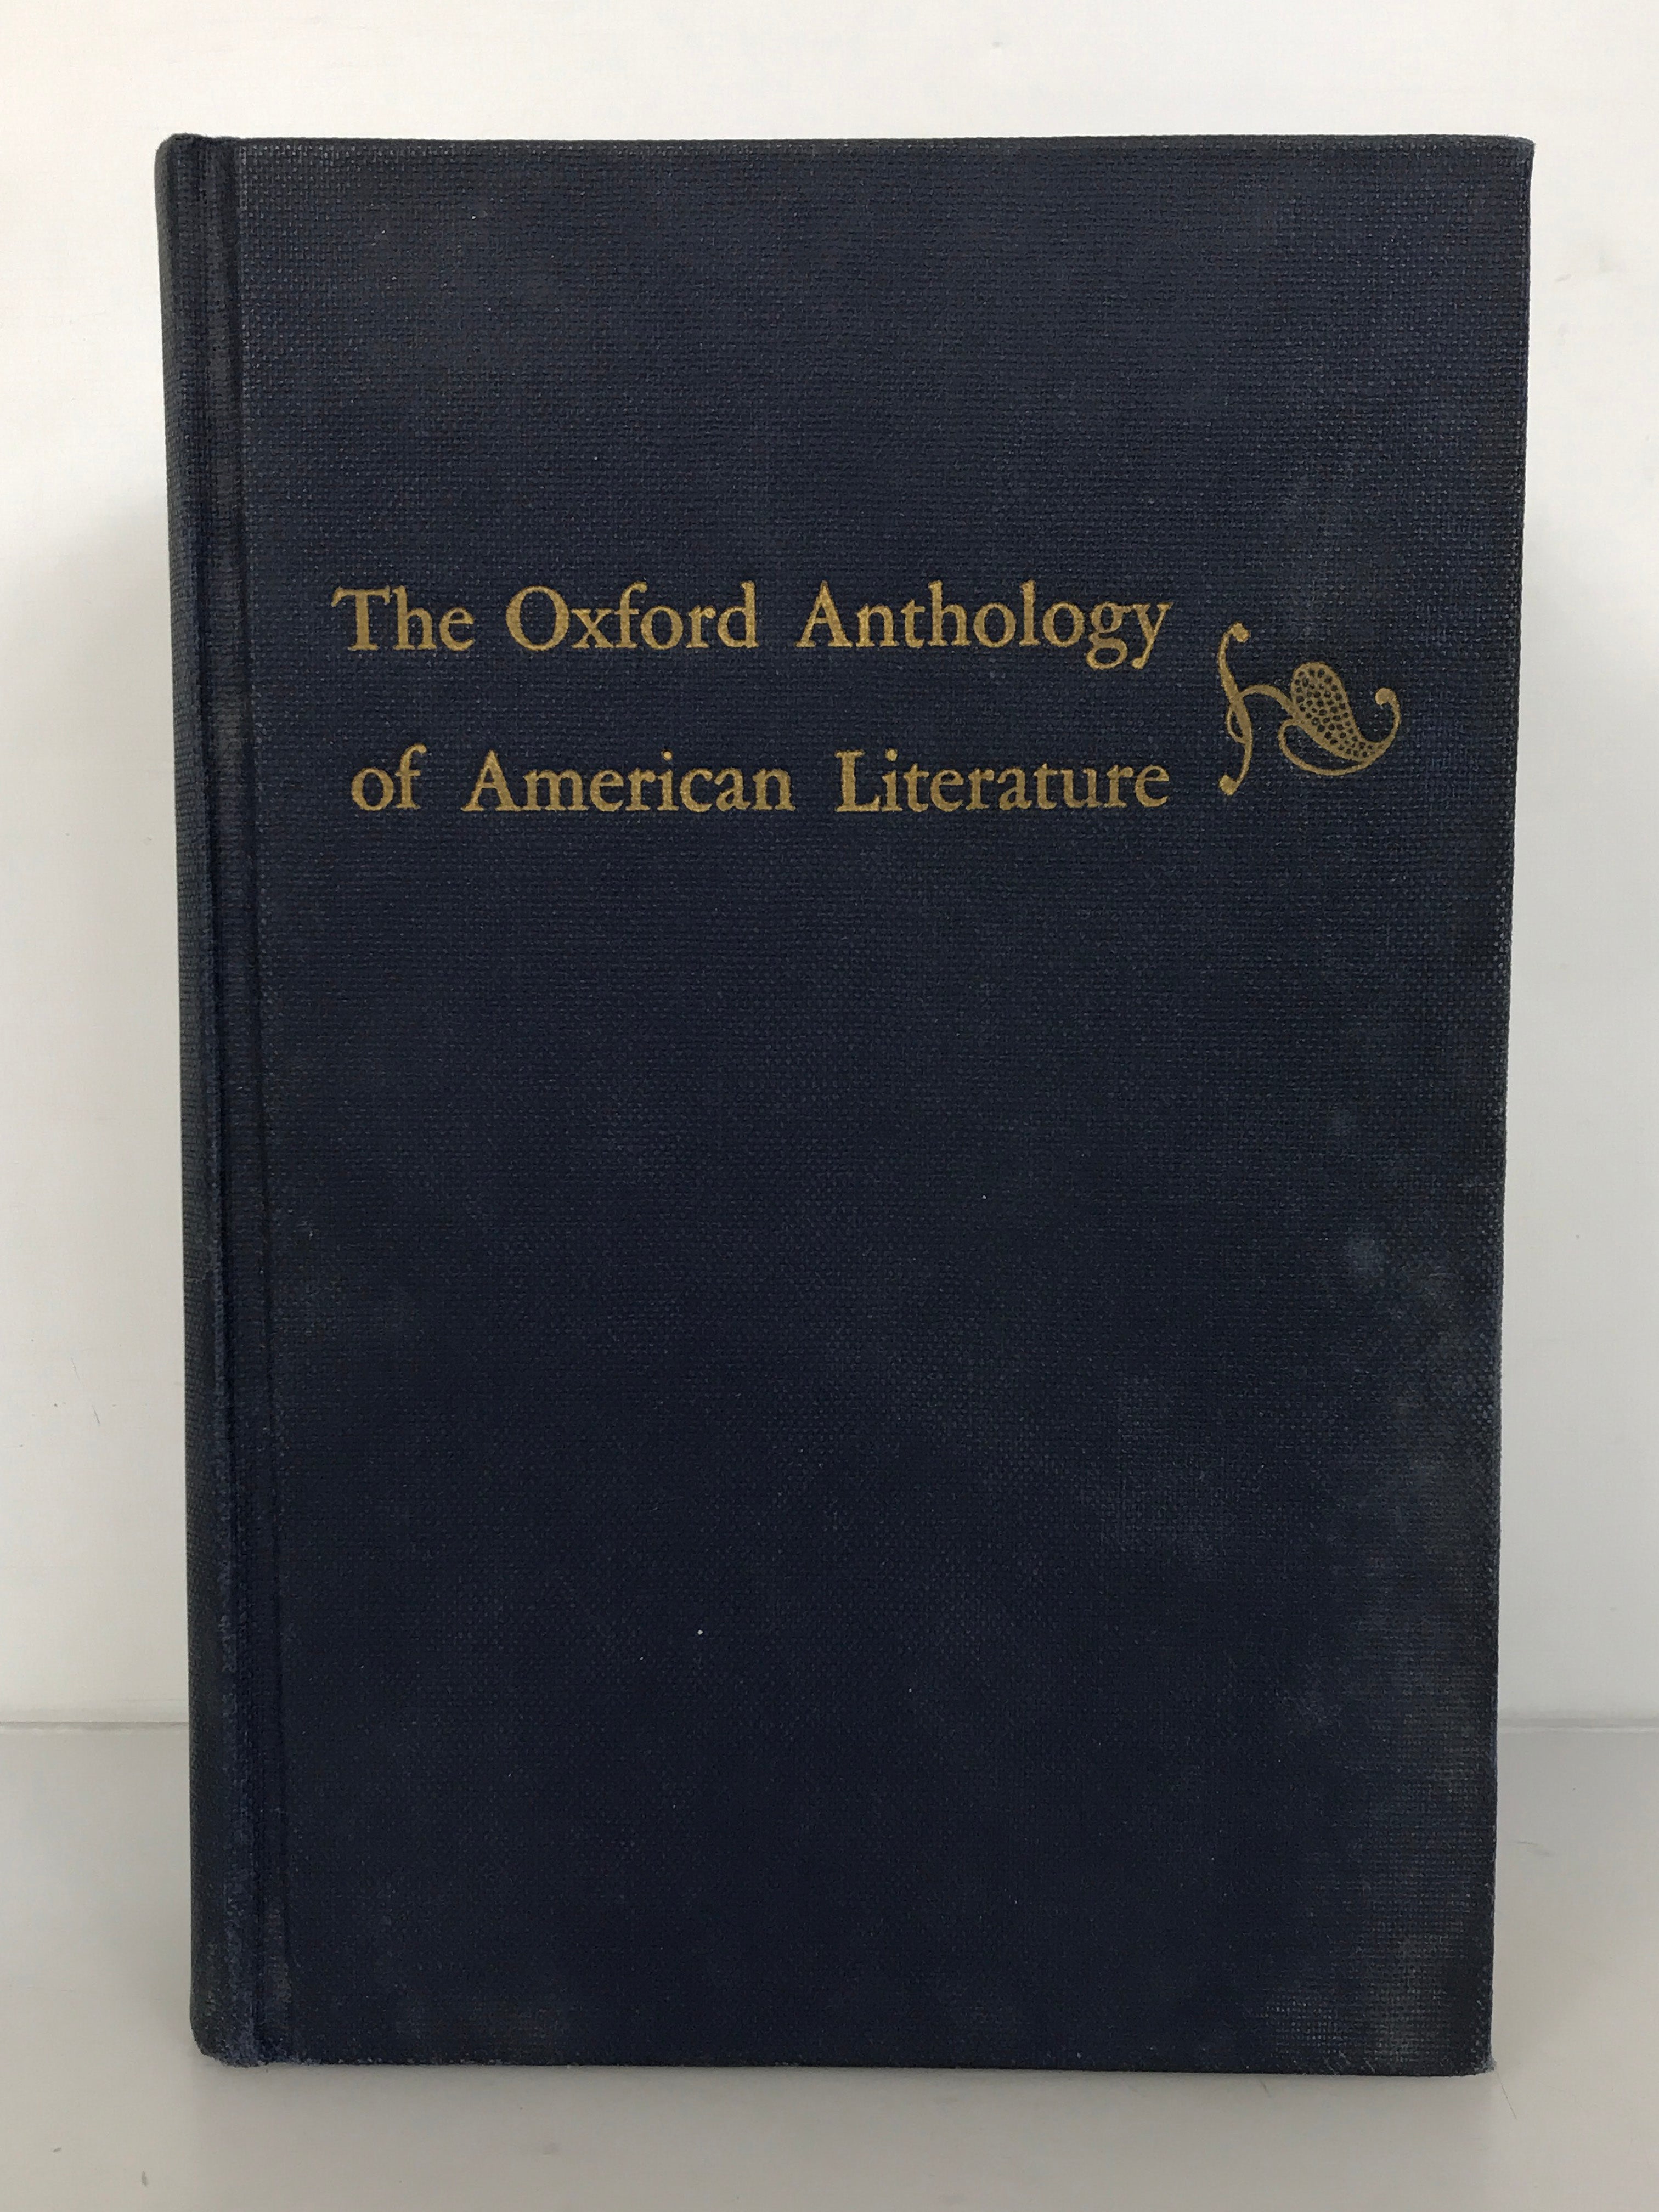 The Oxford Anthology of American Literature Benet and Pearson 1945 Sixth Printing HC